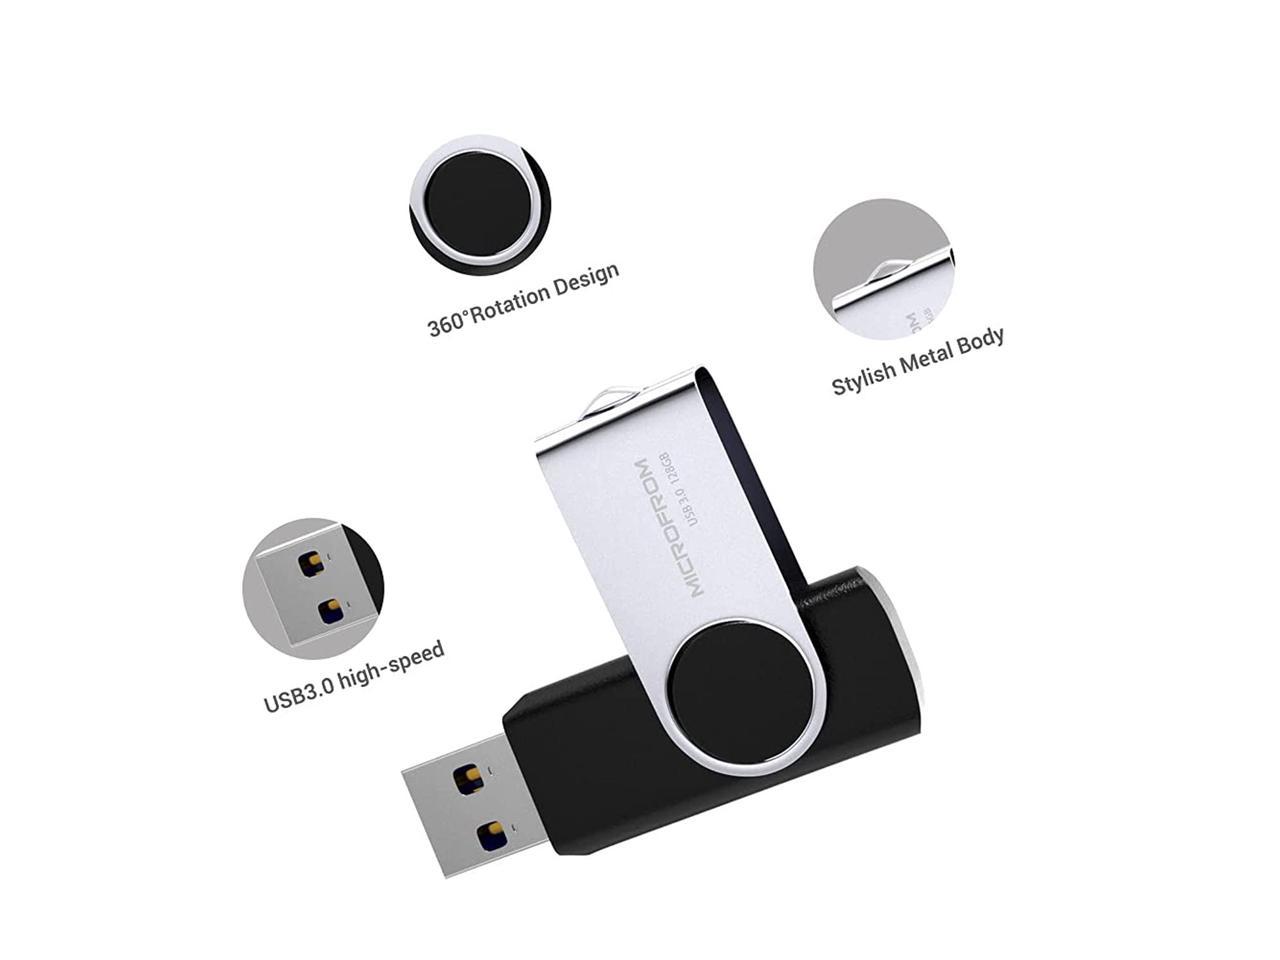 128G,Black MICROFROM USB 3.0 Flash Drive 128GB USB Flash Storage with 360°Rotated Design Speed up to 150MB/S Memory Stick with ABS and Metal Design for Data Storage and Backup 